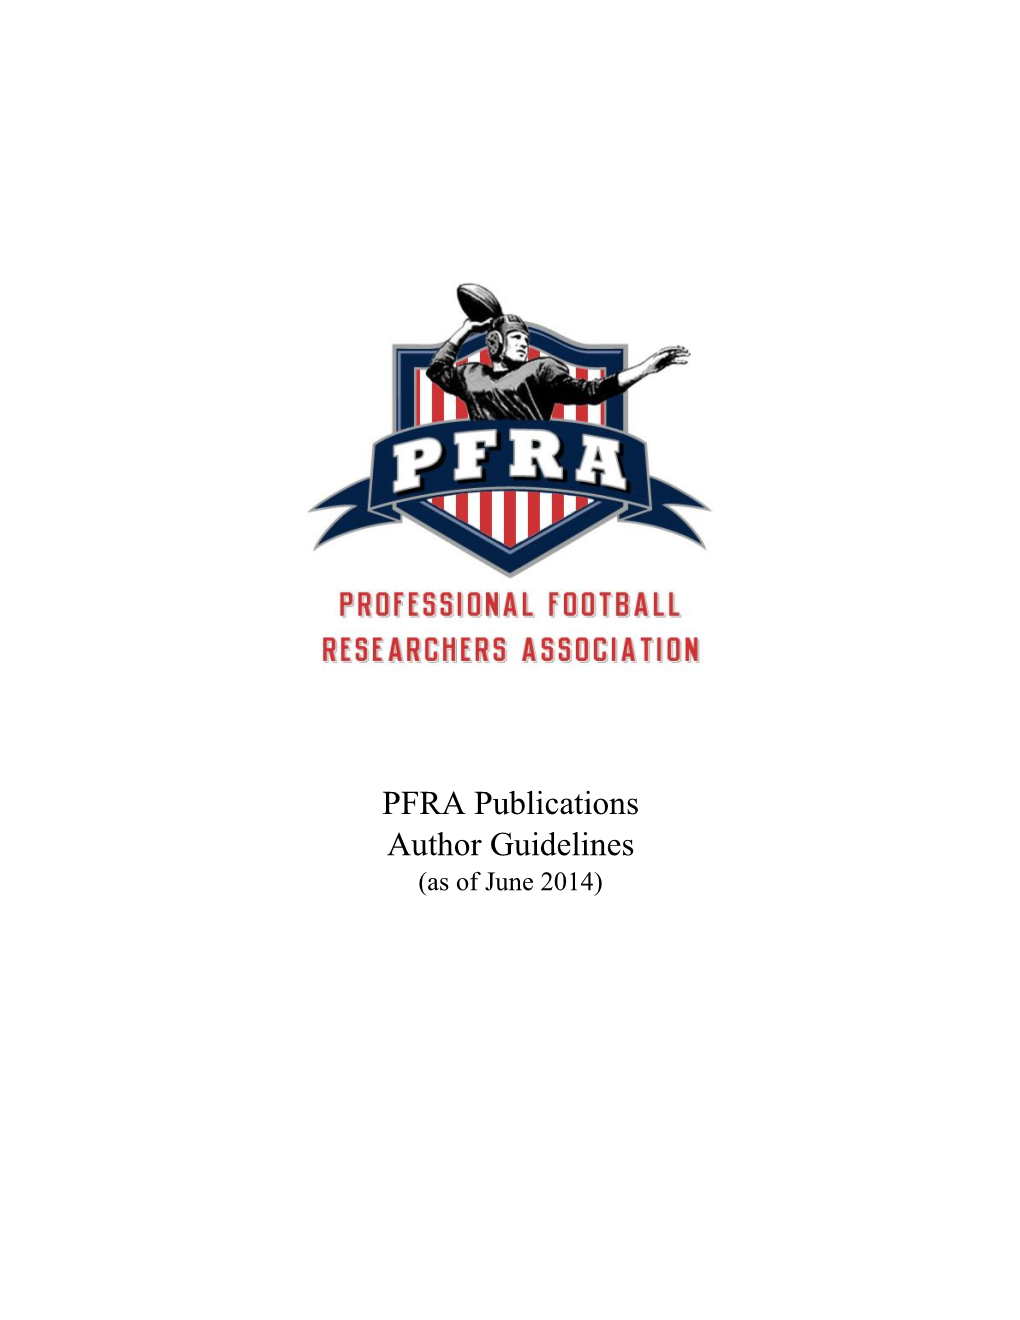 PFRA Publications Author Guidelines (As of June 2014)